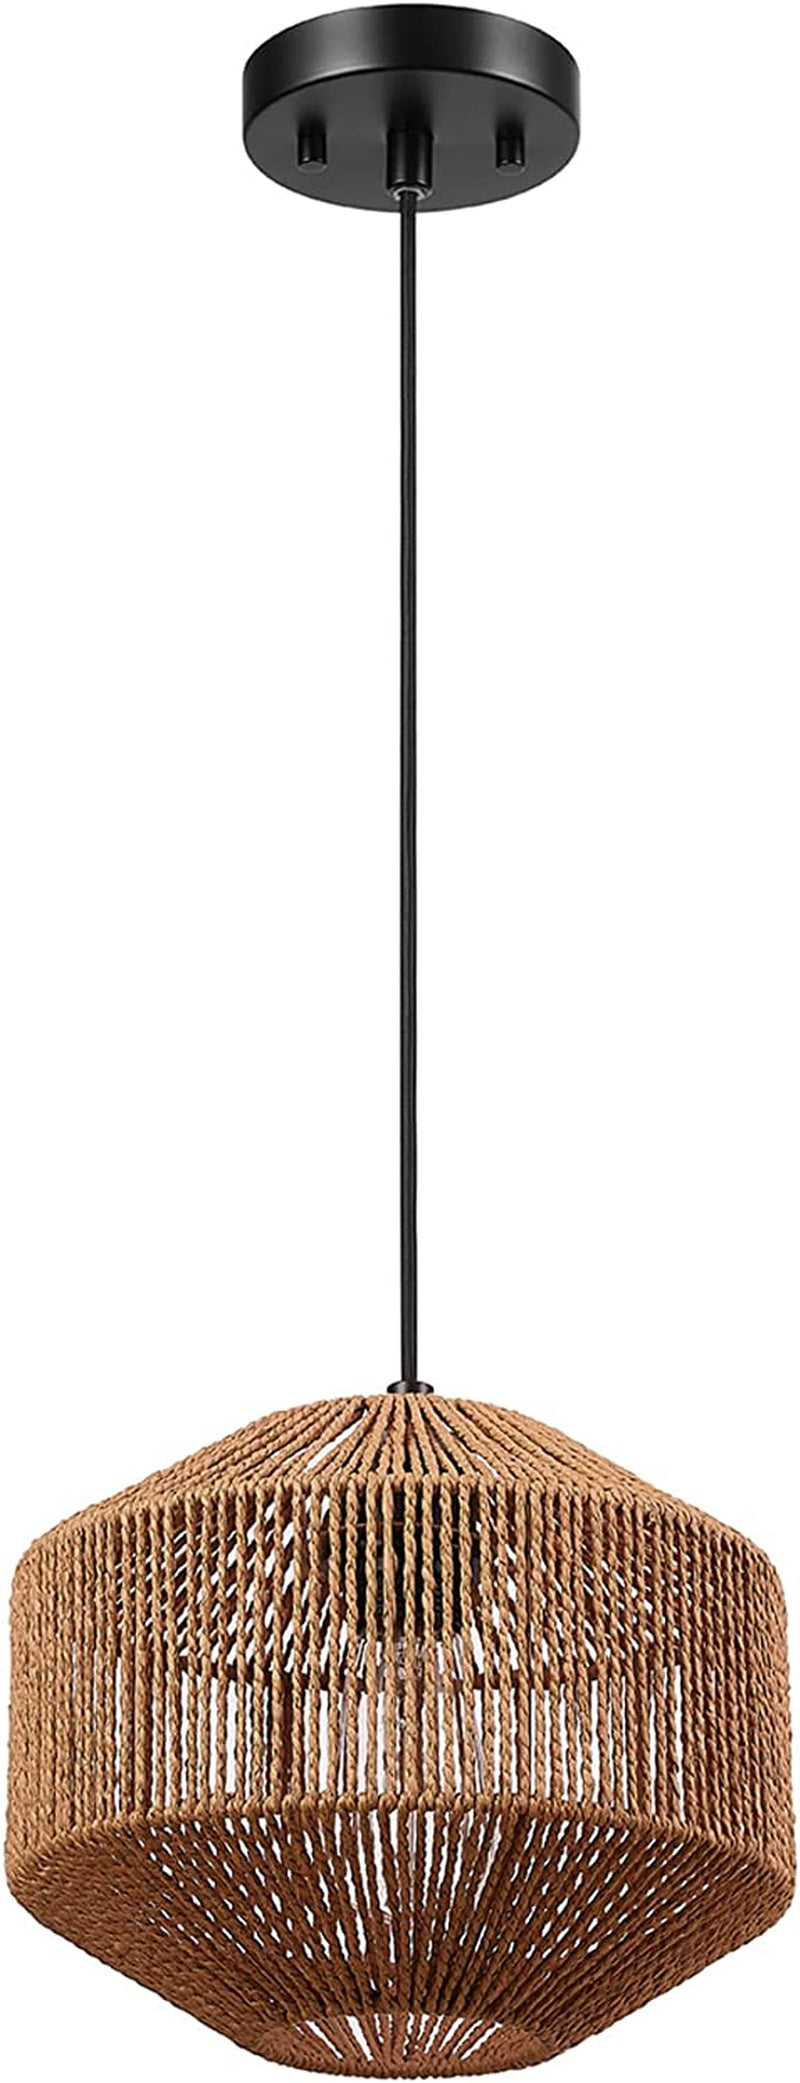 Globe Electric 61090 1-Light Pendant Light, Light Twine Shade, White Socket, White Cloth Hanging Cord, E26 Base Socket, Kitchen Island, Pendant Light Fixture, Adjustable Height, Home Décor Lighting Home & Garden > Lighting > Lighting Fixtures Globe Electric Lotus Without Bulb 